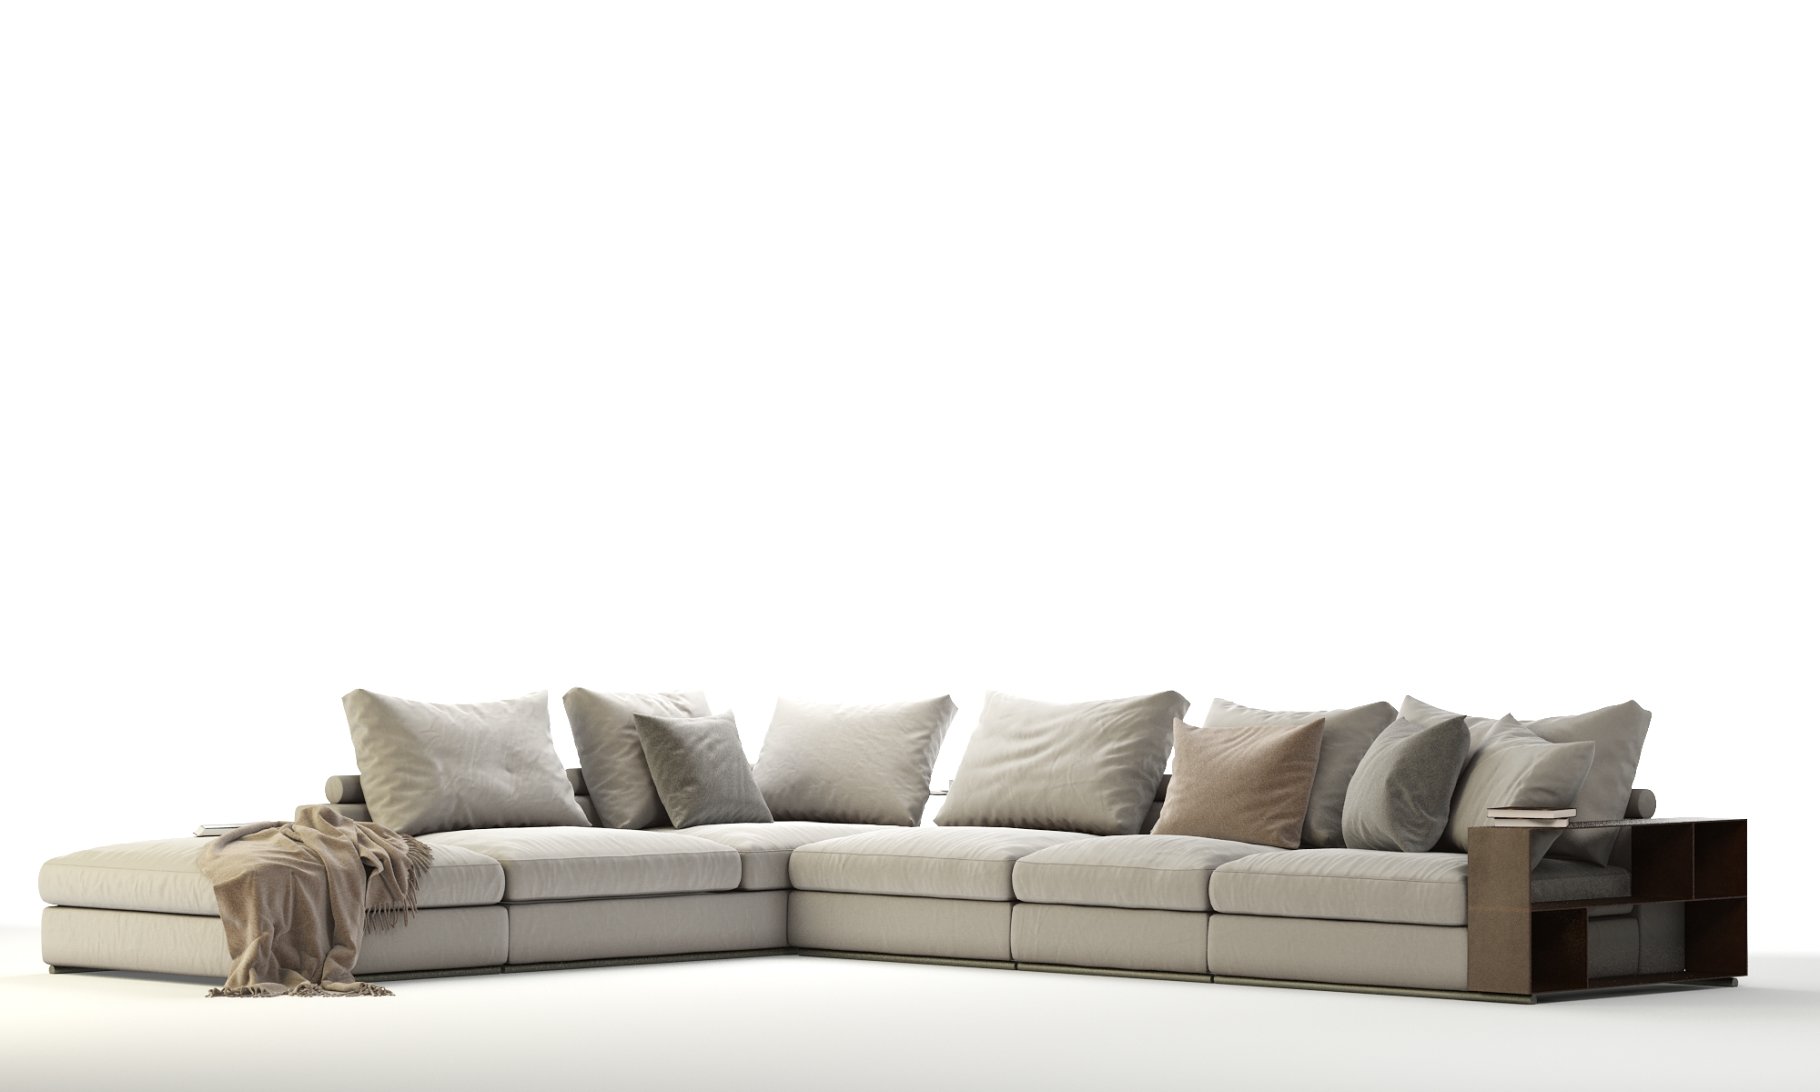 Images of an irresistible 3d model of a corner sectional sofa